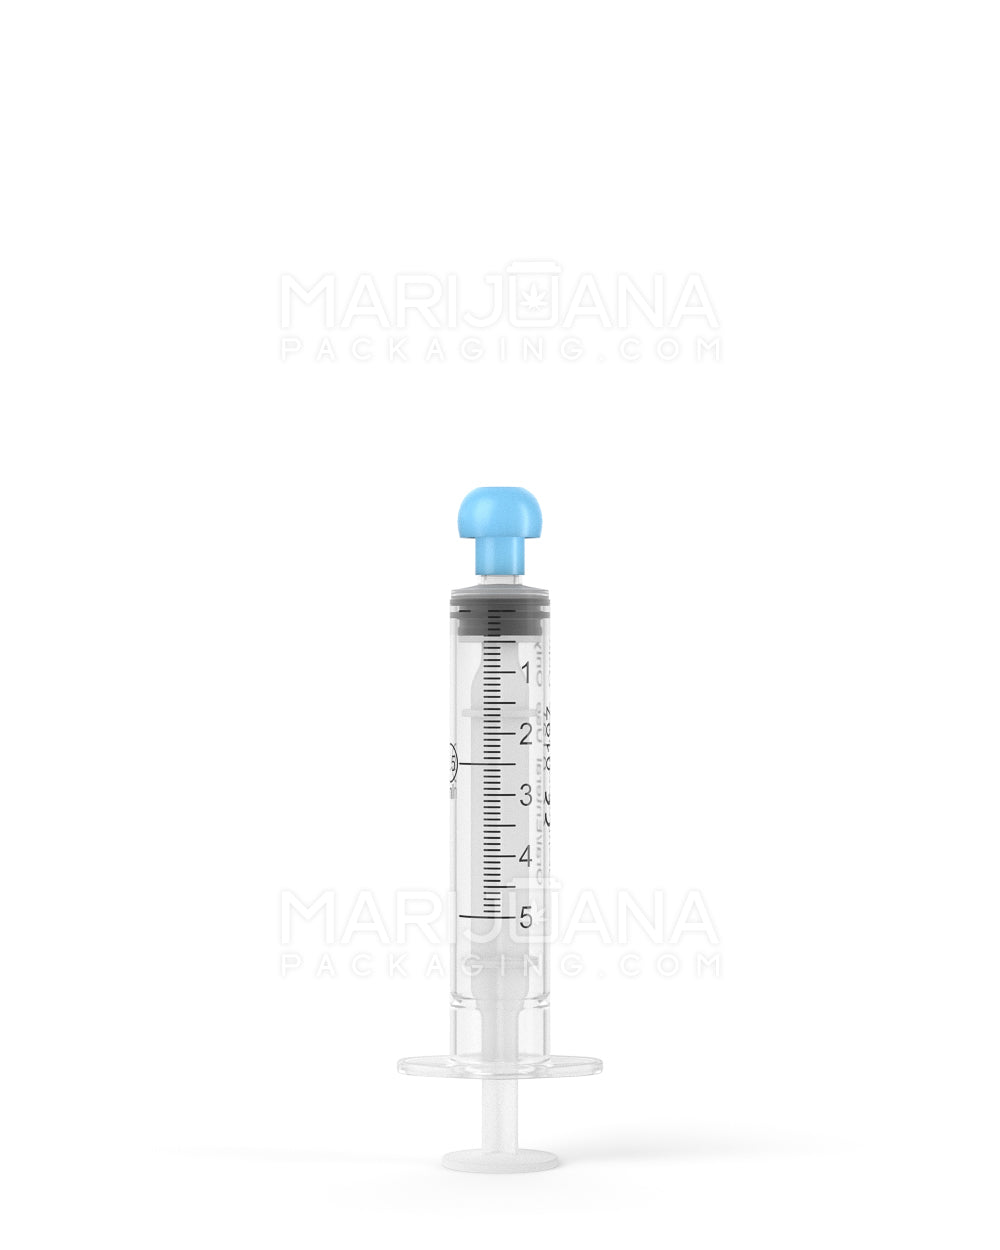 Plastic Oral Concentrate Syringes | 5mL - 1mL Increments | Sample - 8